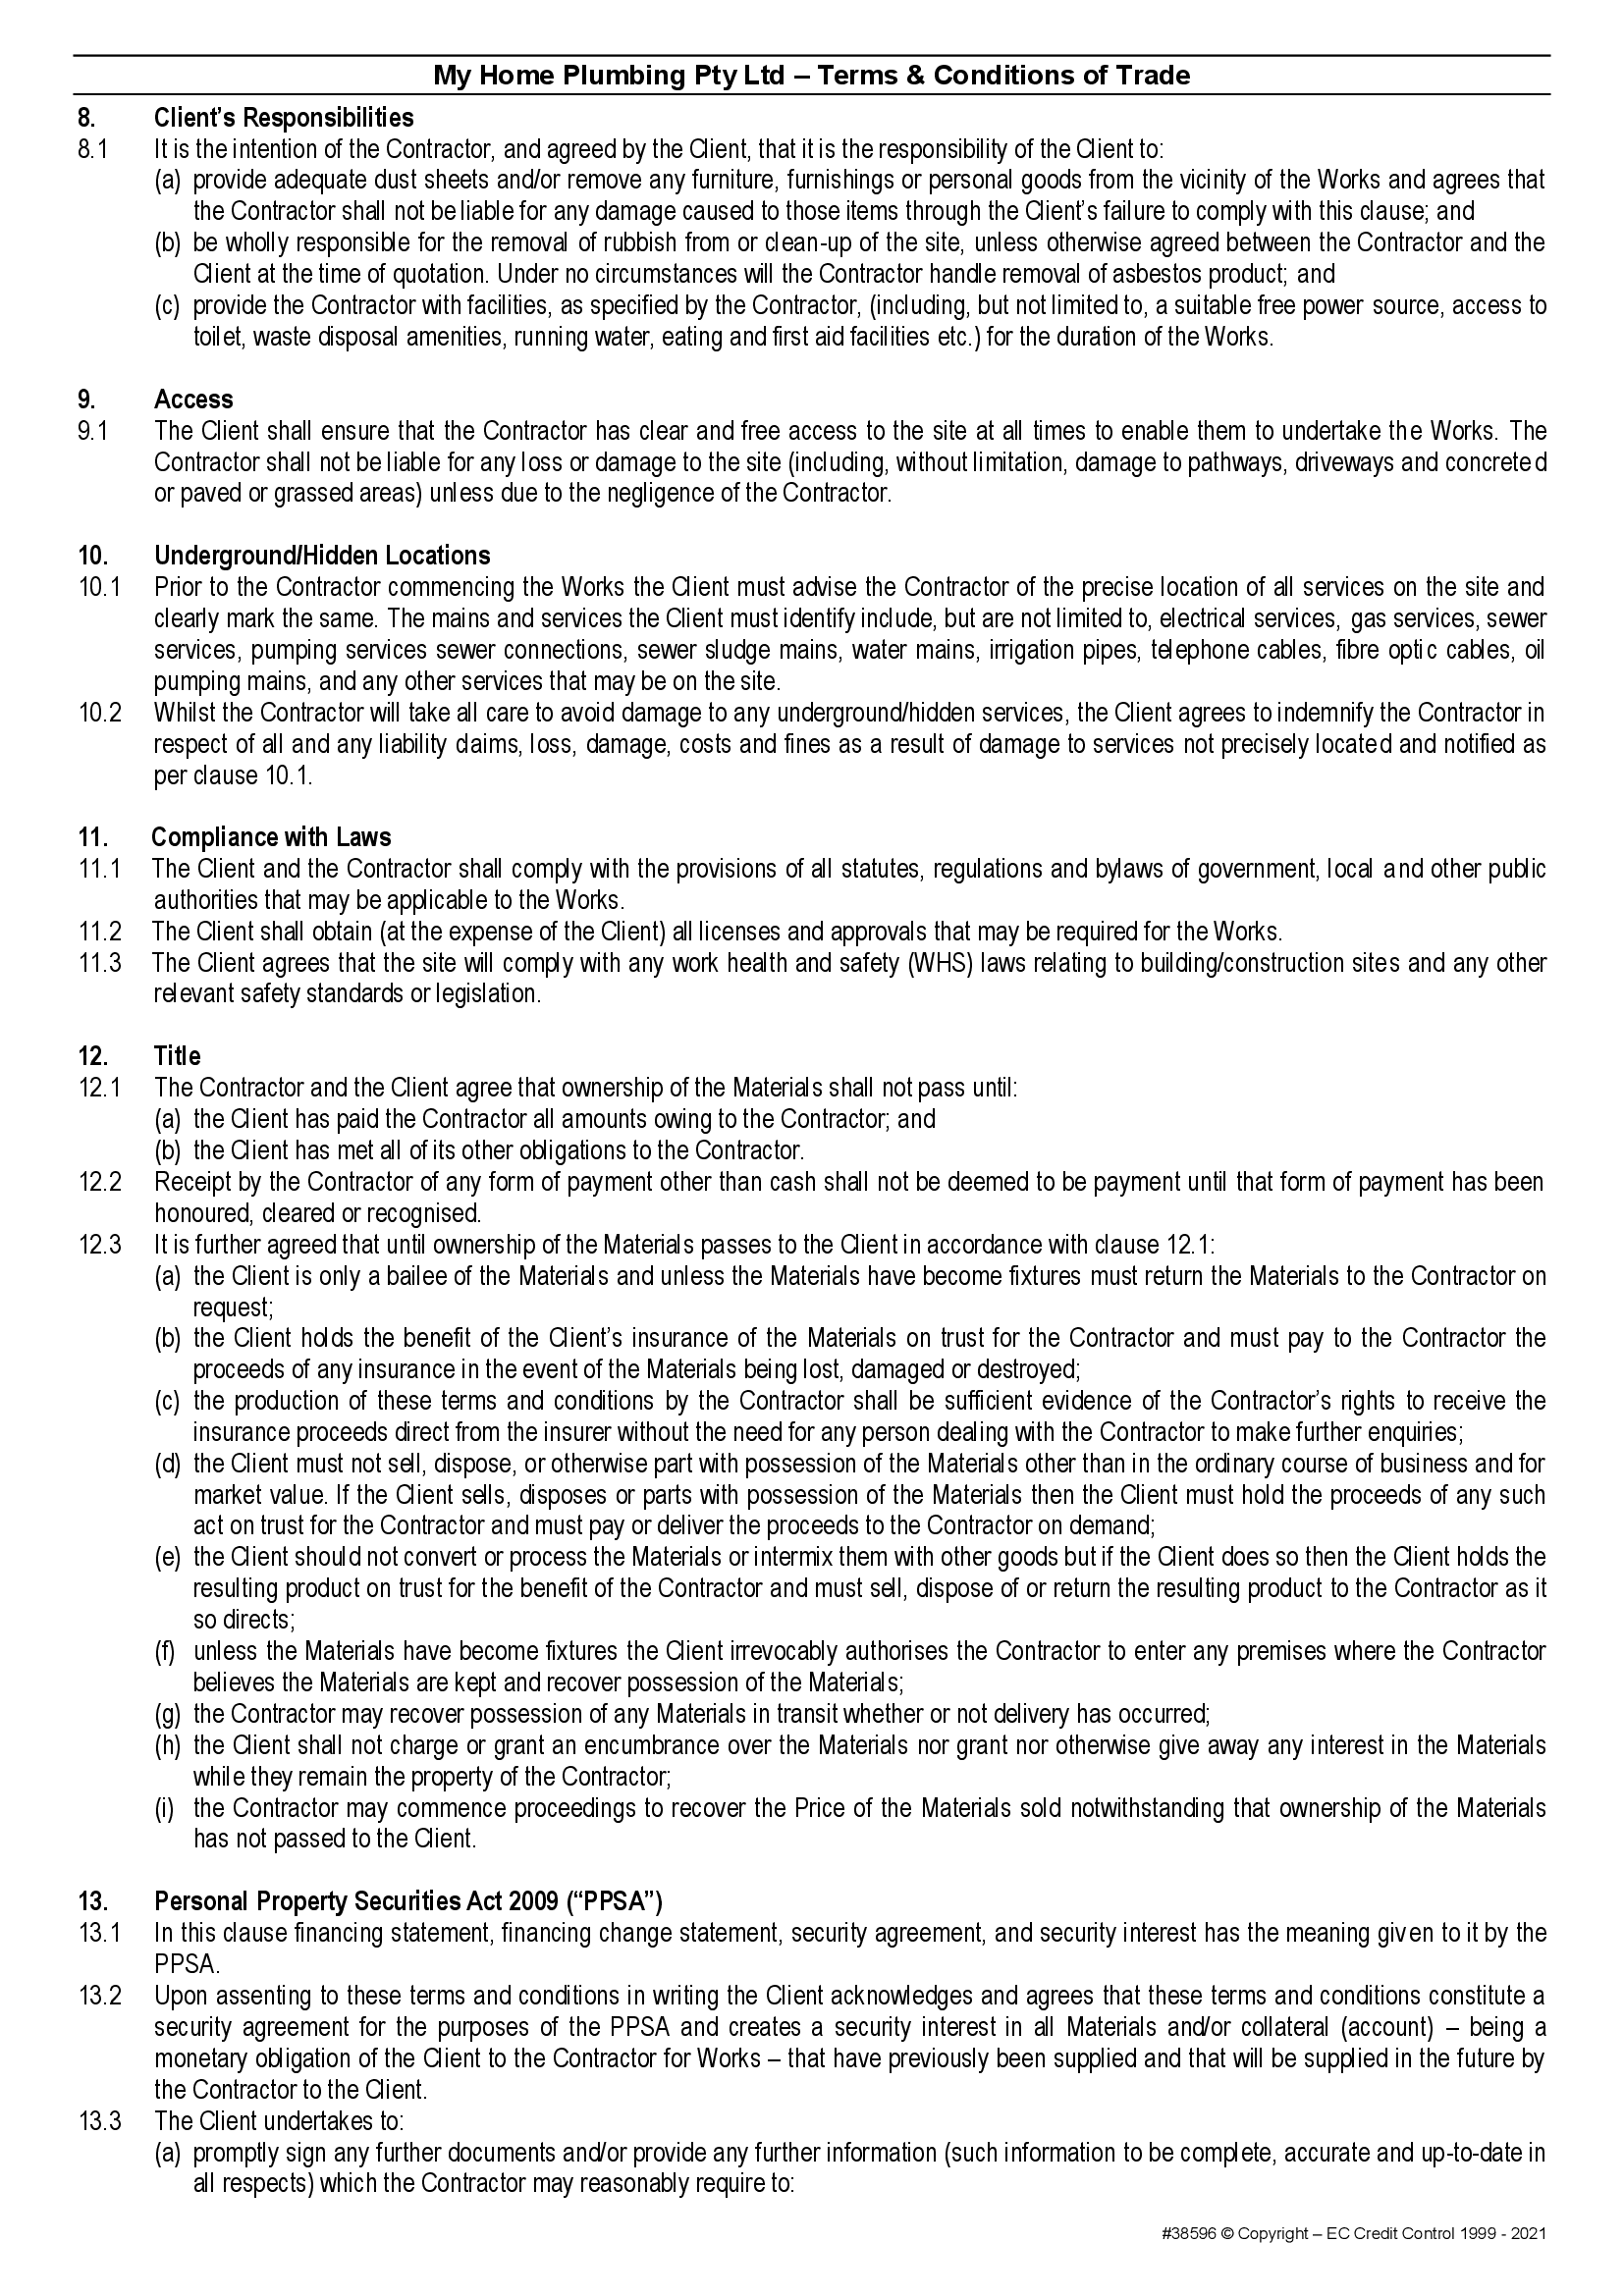 MHP terms and conditions page 4